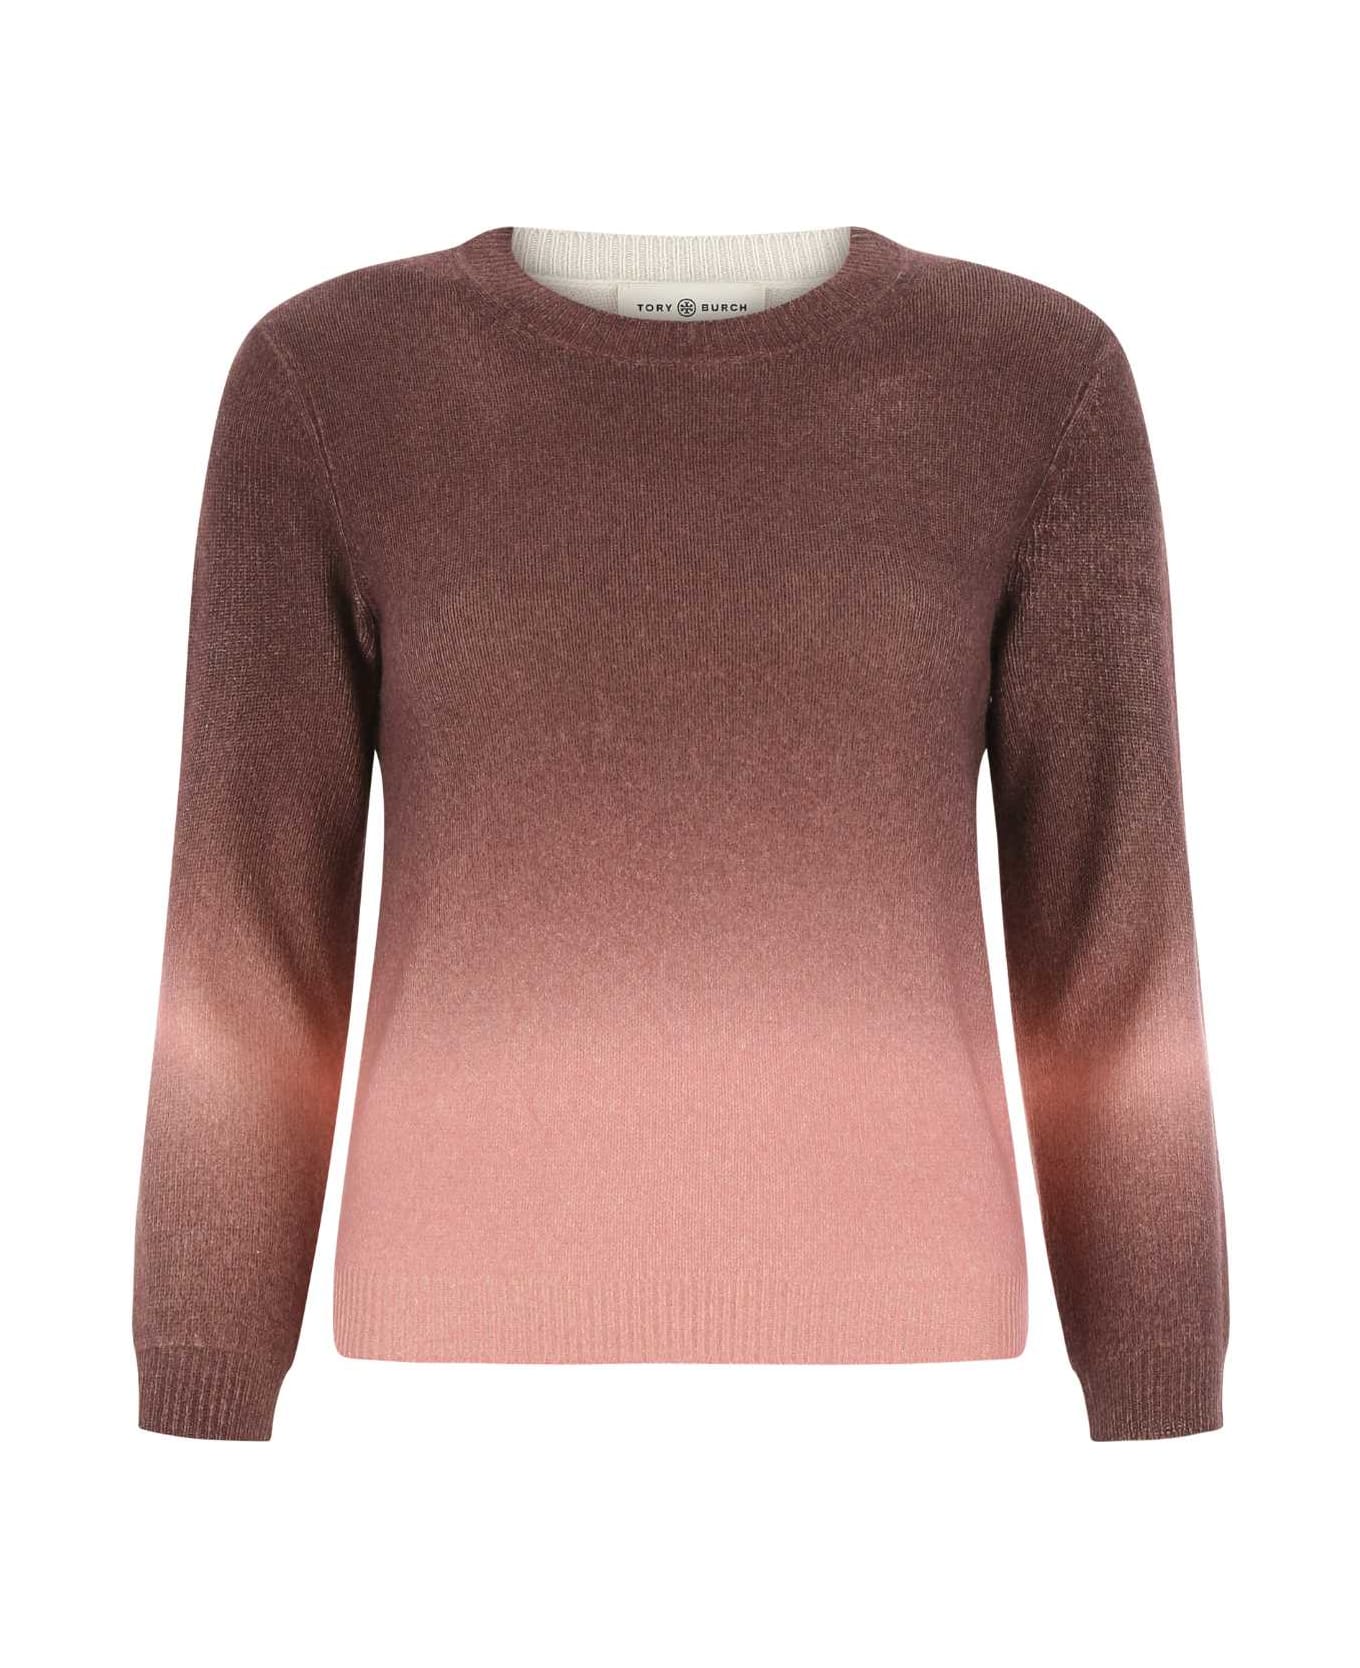 Tory Burch Multicolor Cashmere Sweater - 651 ニットウェア